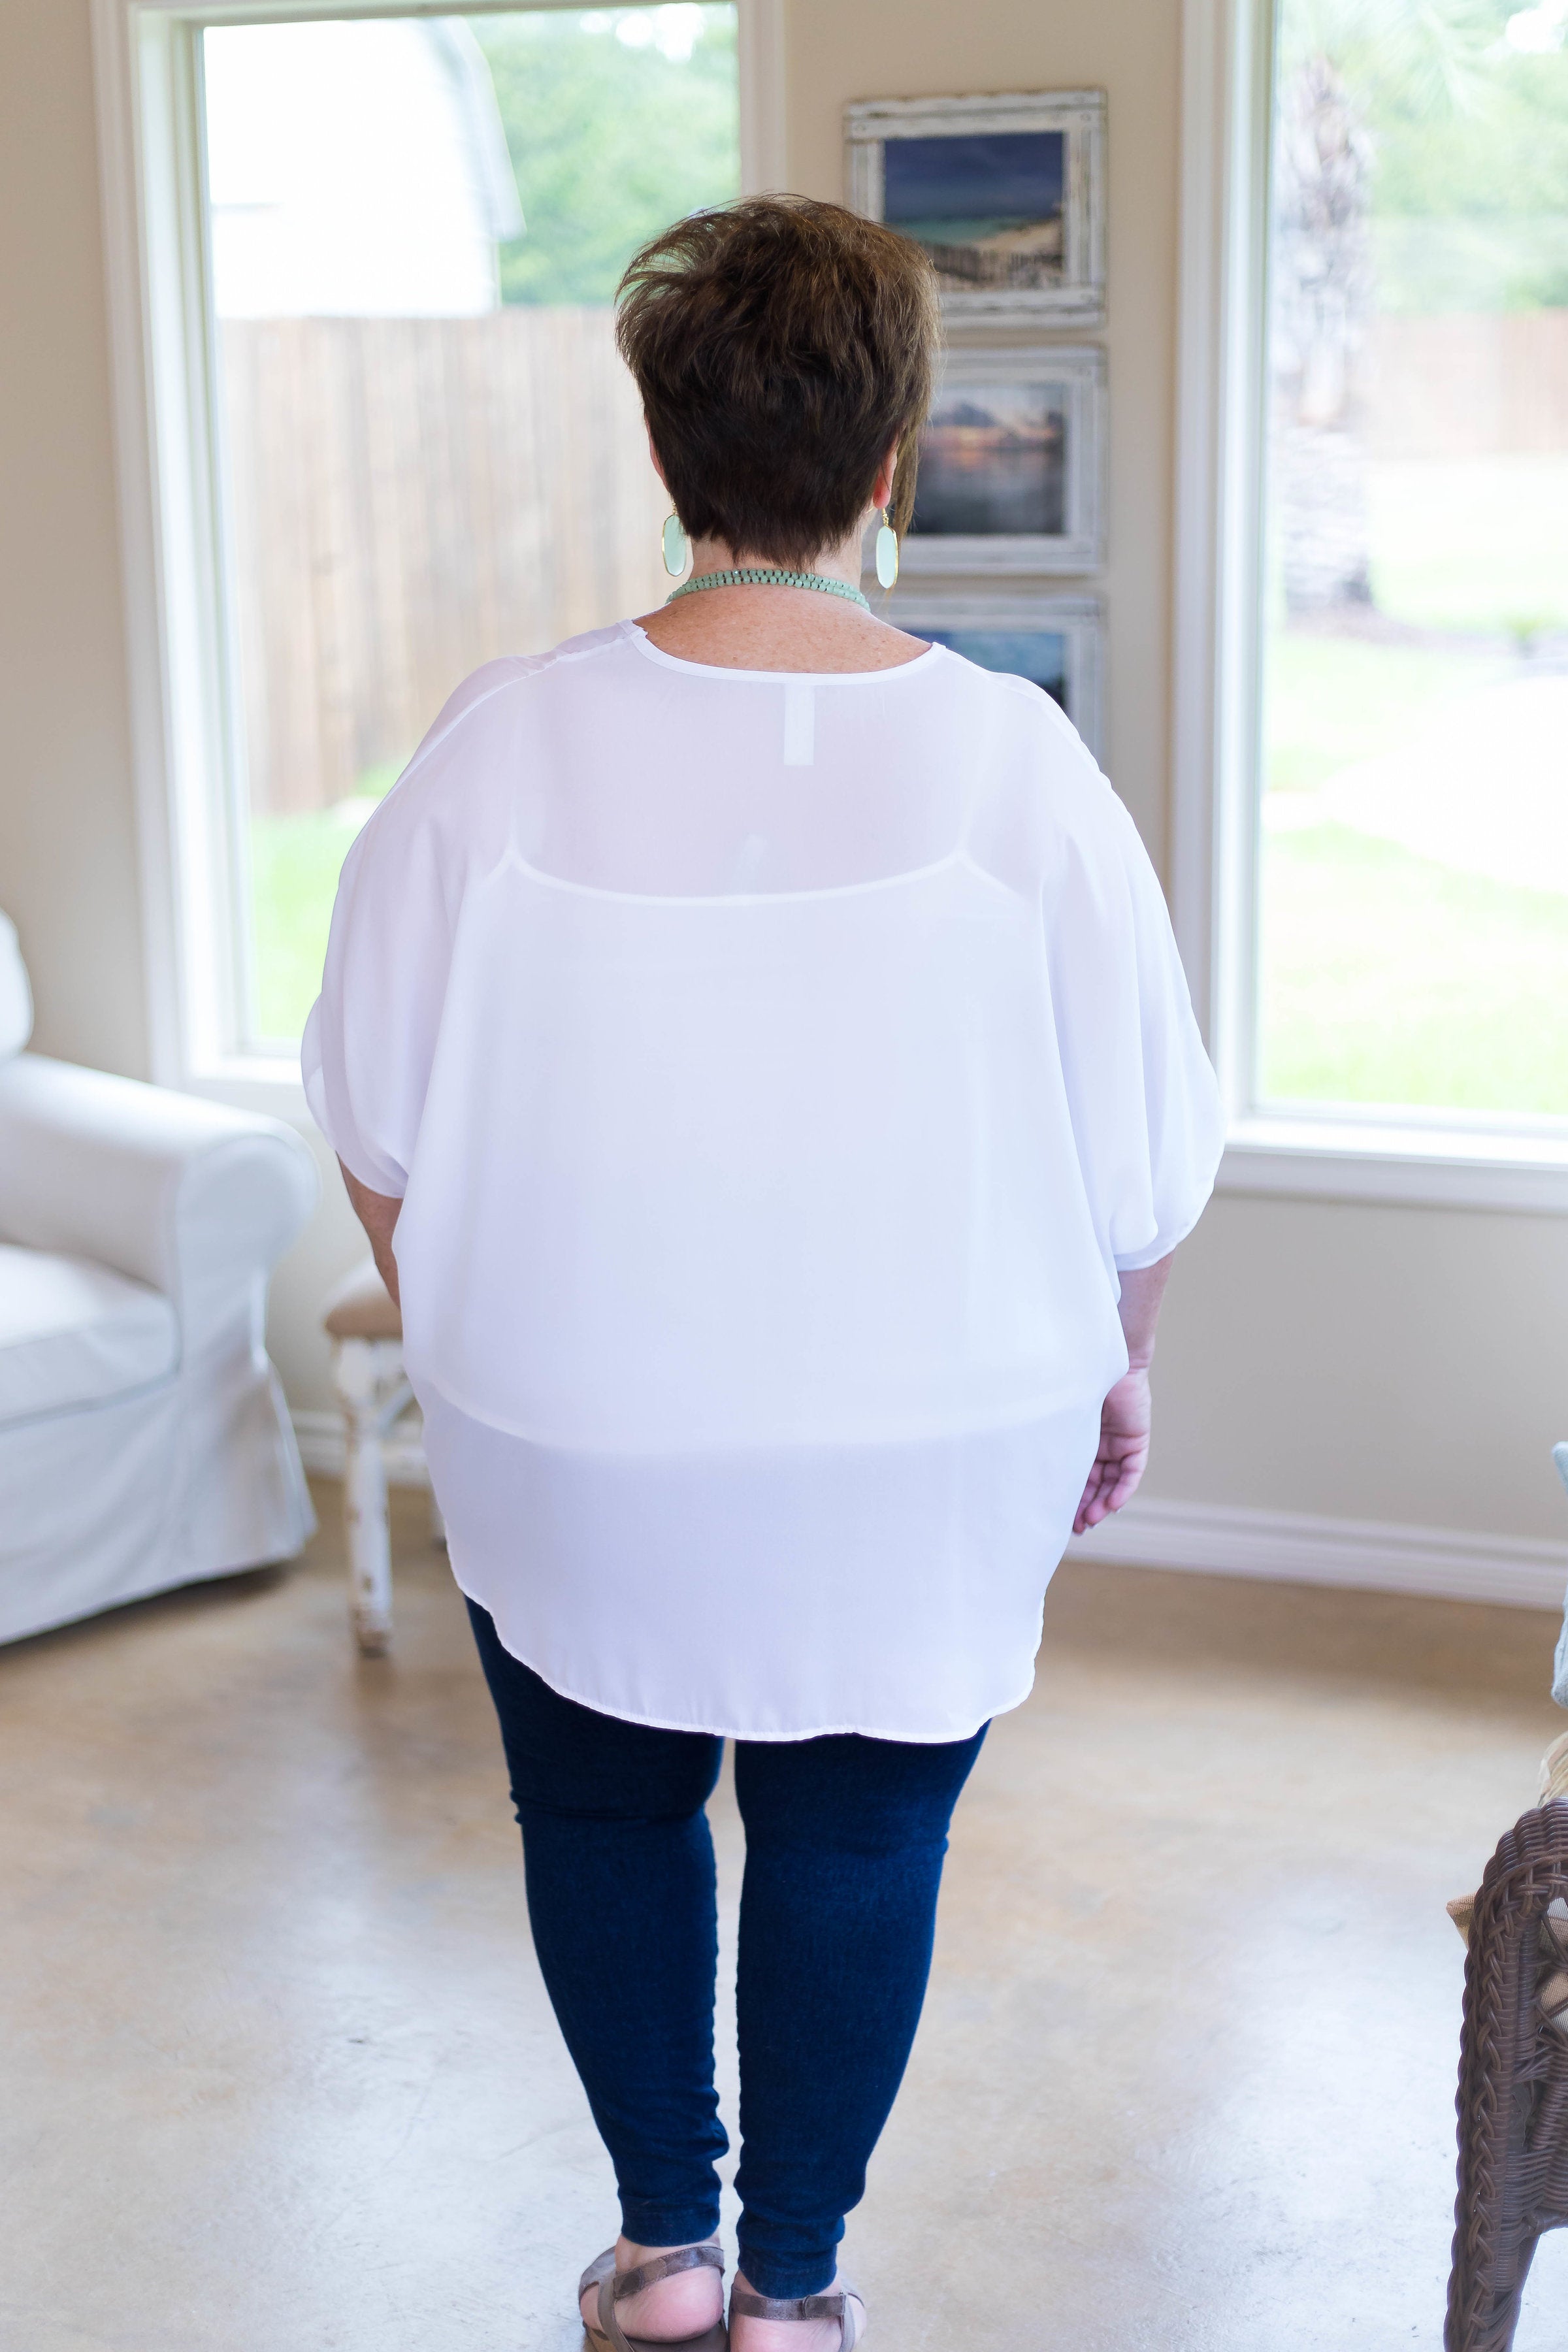 Last Chance Size Medium (Oversized) | On The Line Sheer Oversized Poncho Top in White - Giddy Up Glamour Boutique